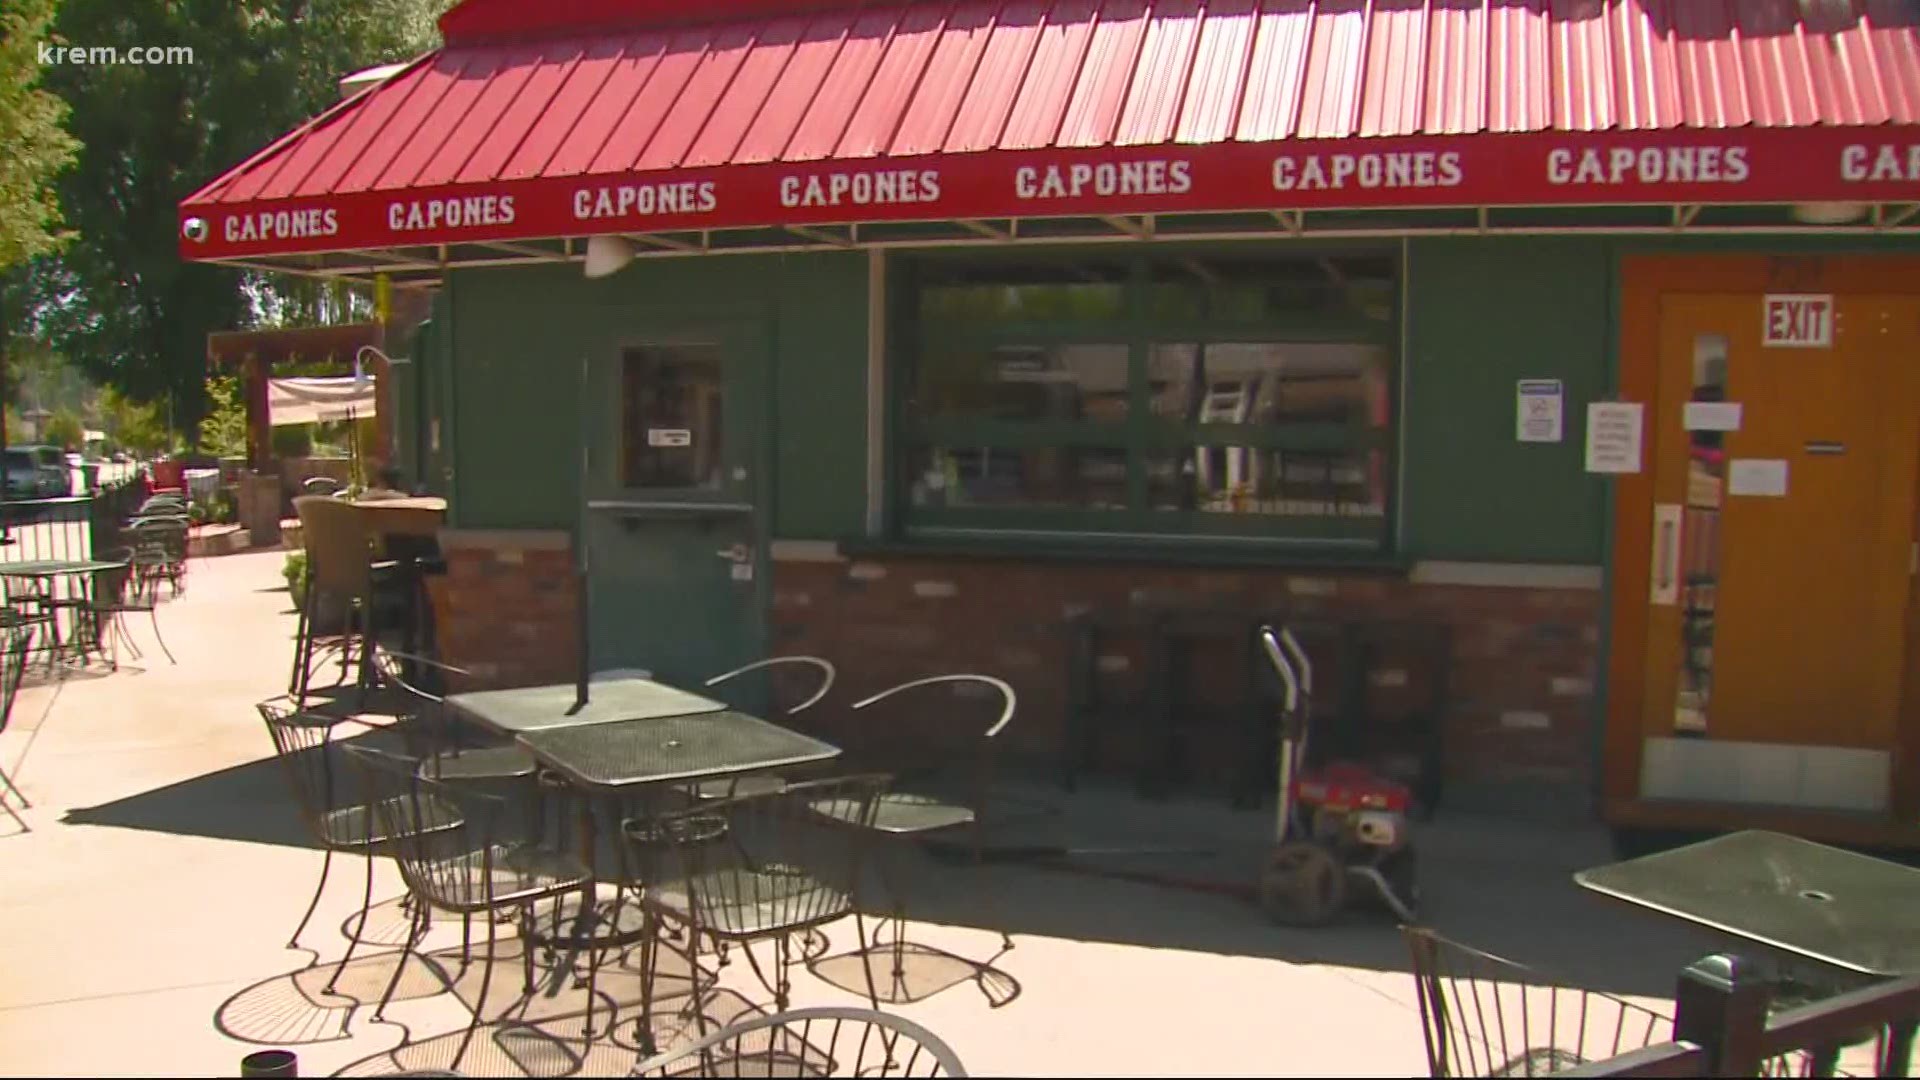 Capone's Pub & Grill was temporarily closed after a customer who knew they had tested positive for coronavirus ate at their restaurant.